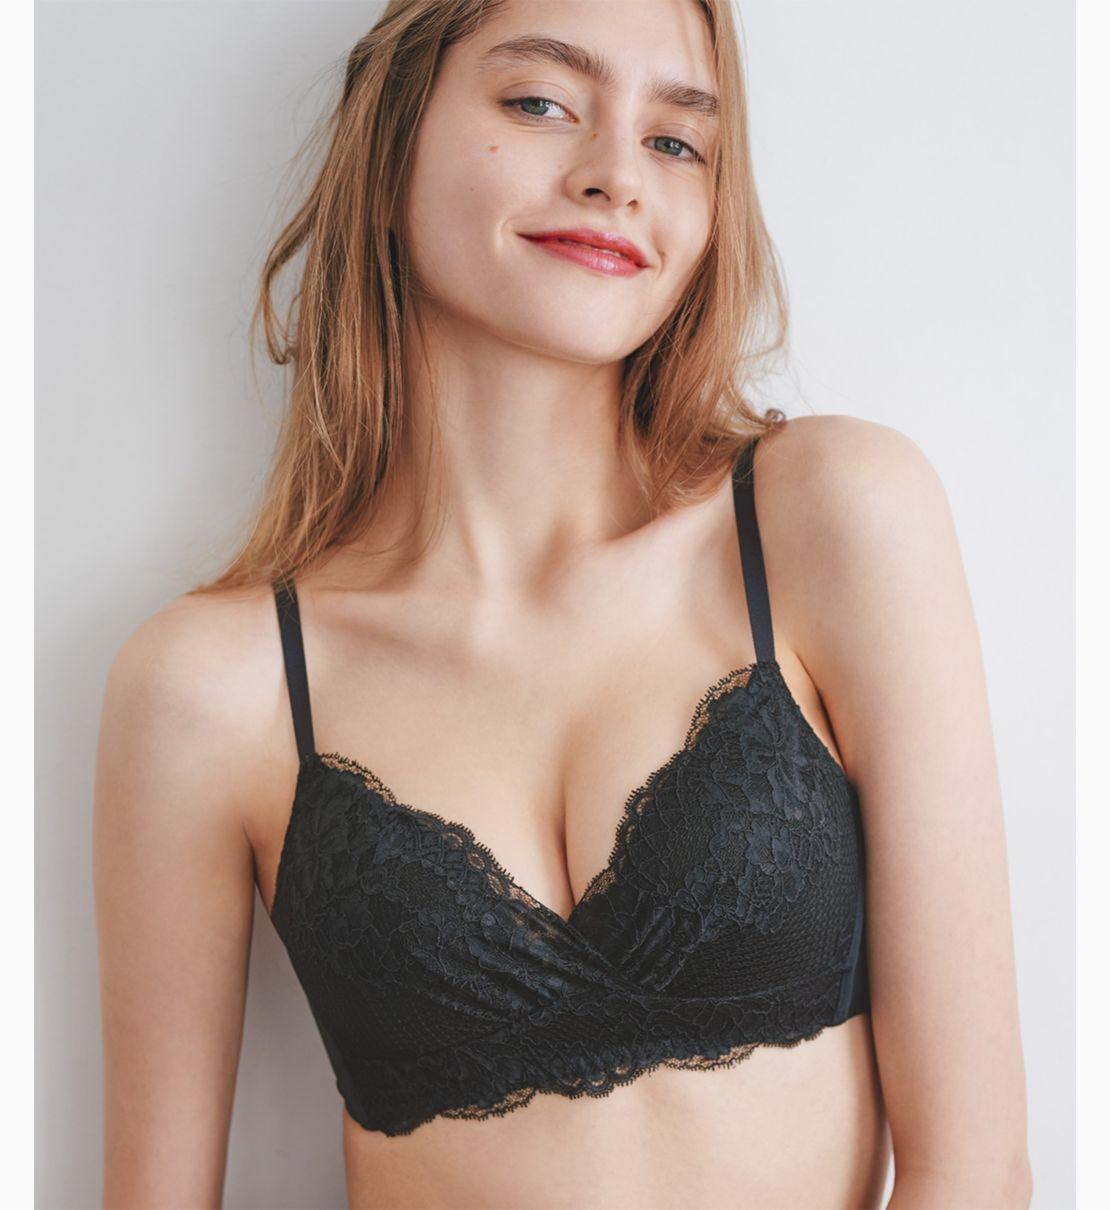 Push Up Flower Lace Non-wire Bra